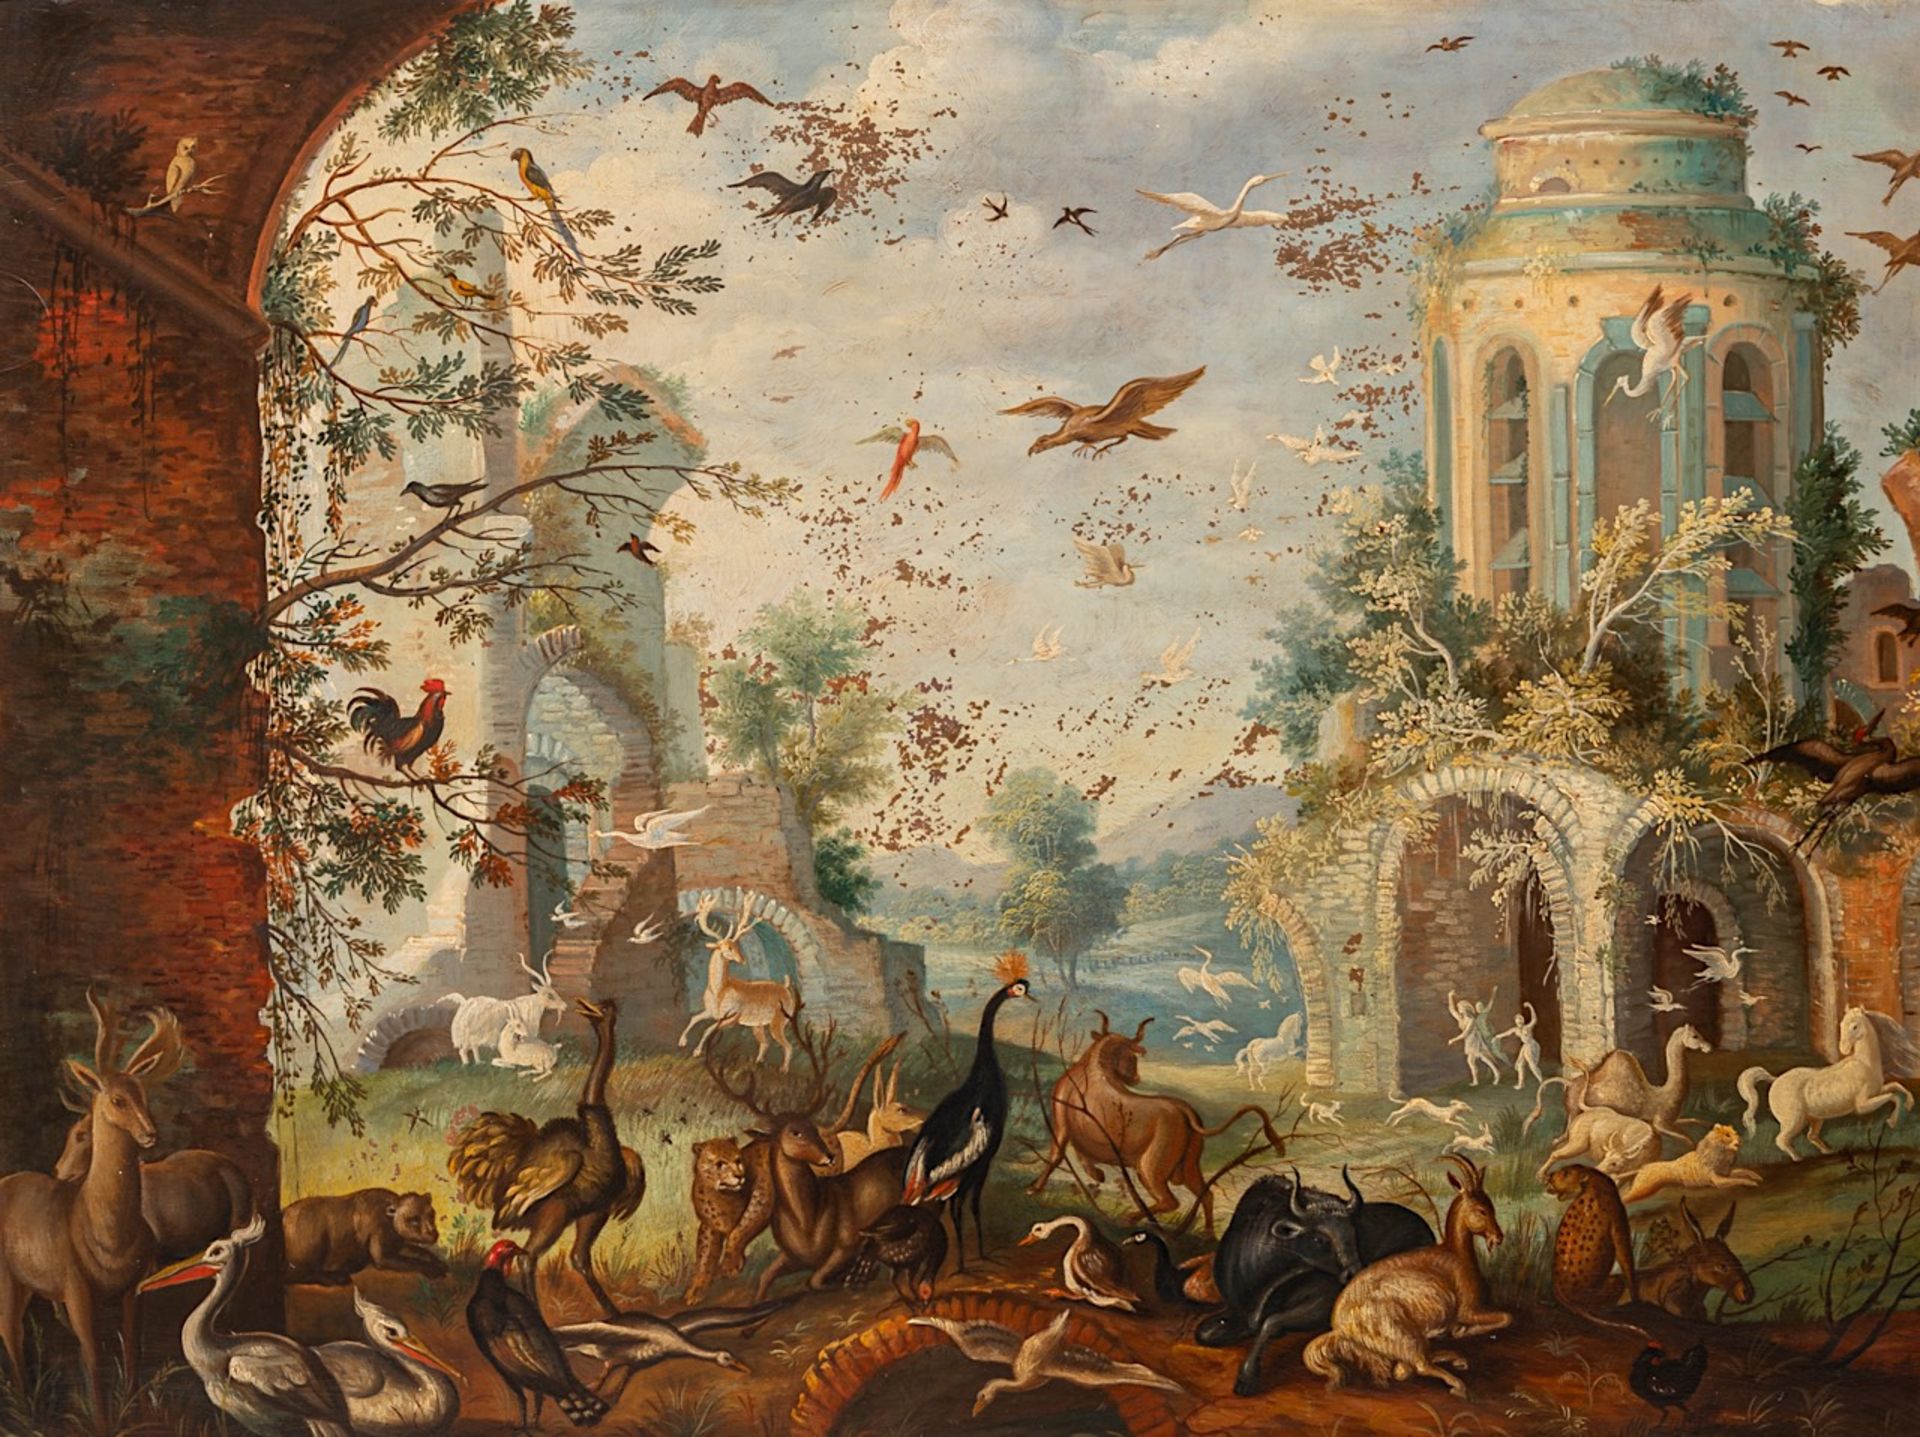 Attributed to Roelant Savery, 'Paradisical landscape with animals', oil on copper (+) 52 x 68 cm. (2